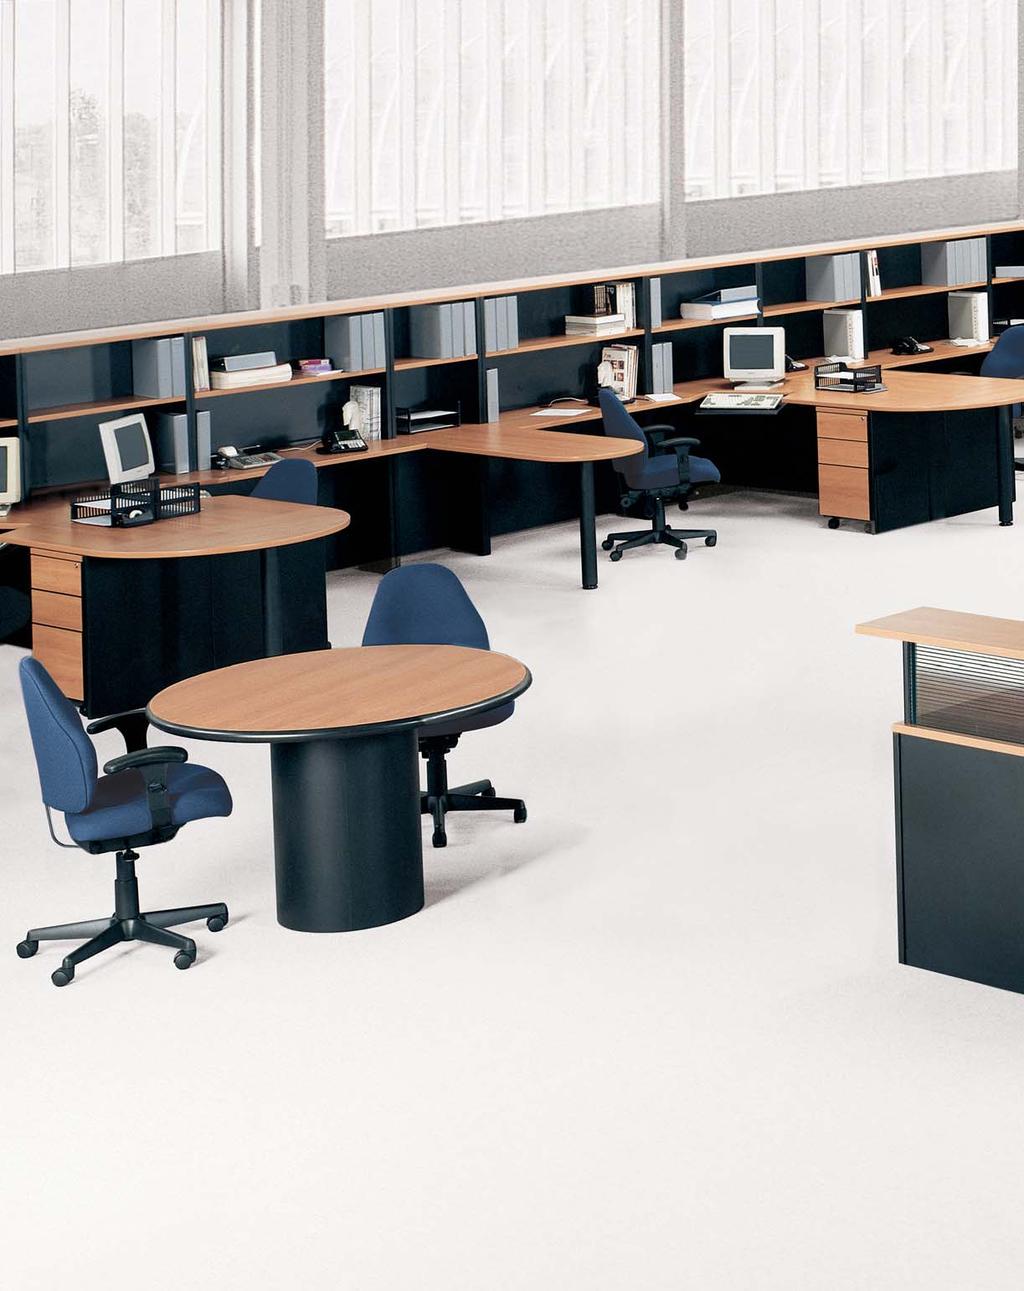 SOLUTIONS Made-To-Fit Freestanding Modular System has turned buying complex, made-to-fit office furniture into an easy, quick, affordable process. We build office furniture made to fit your space.